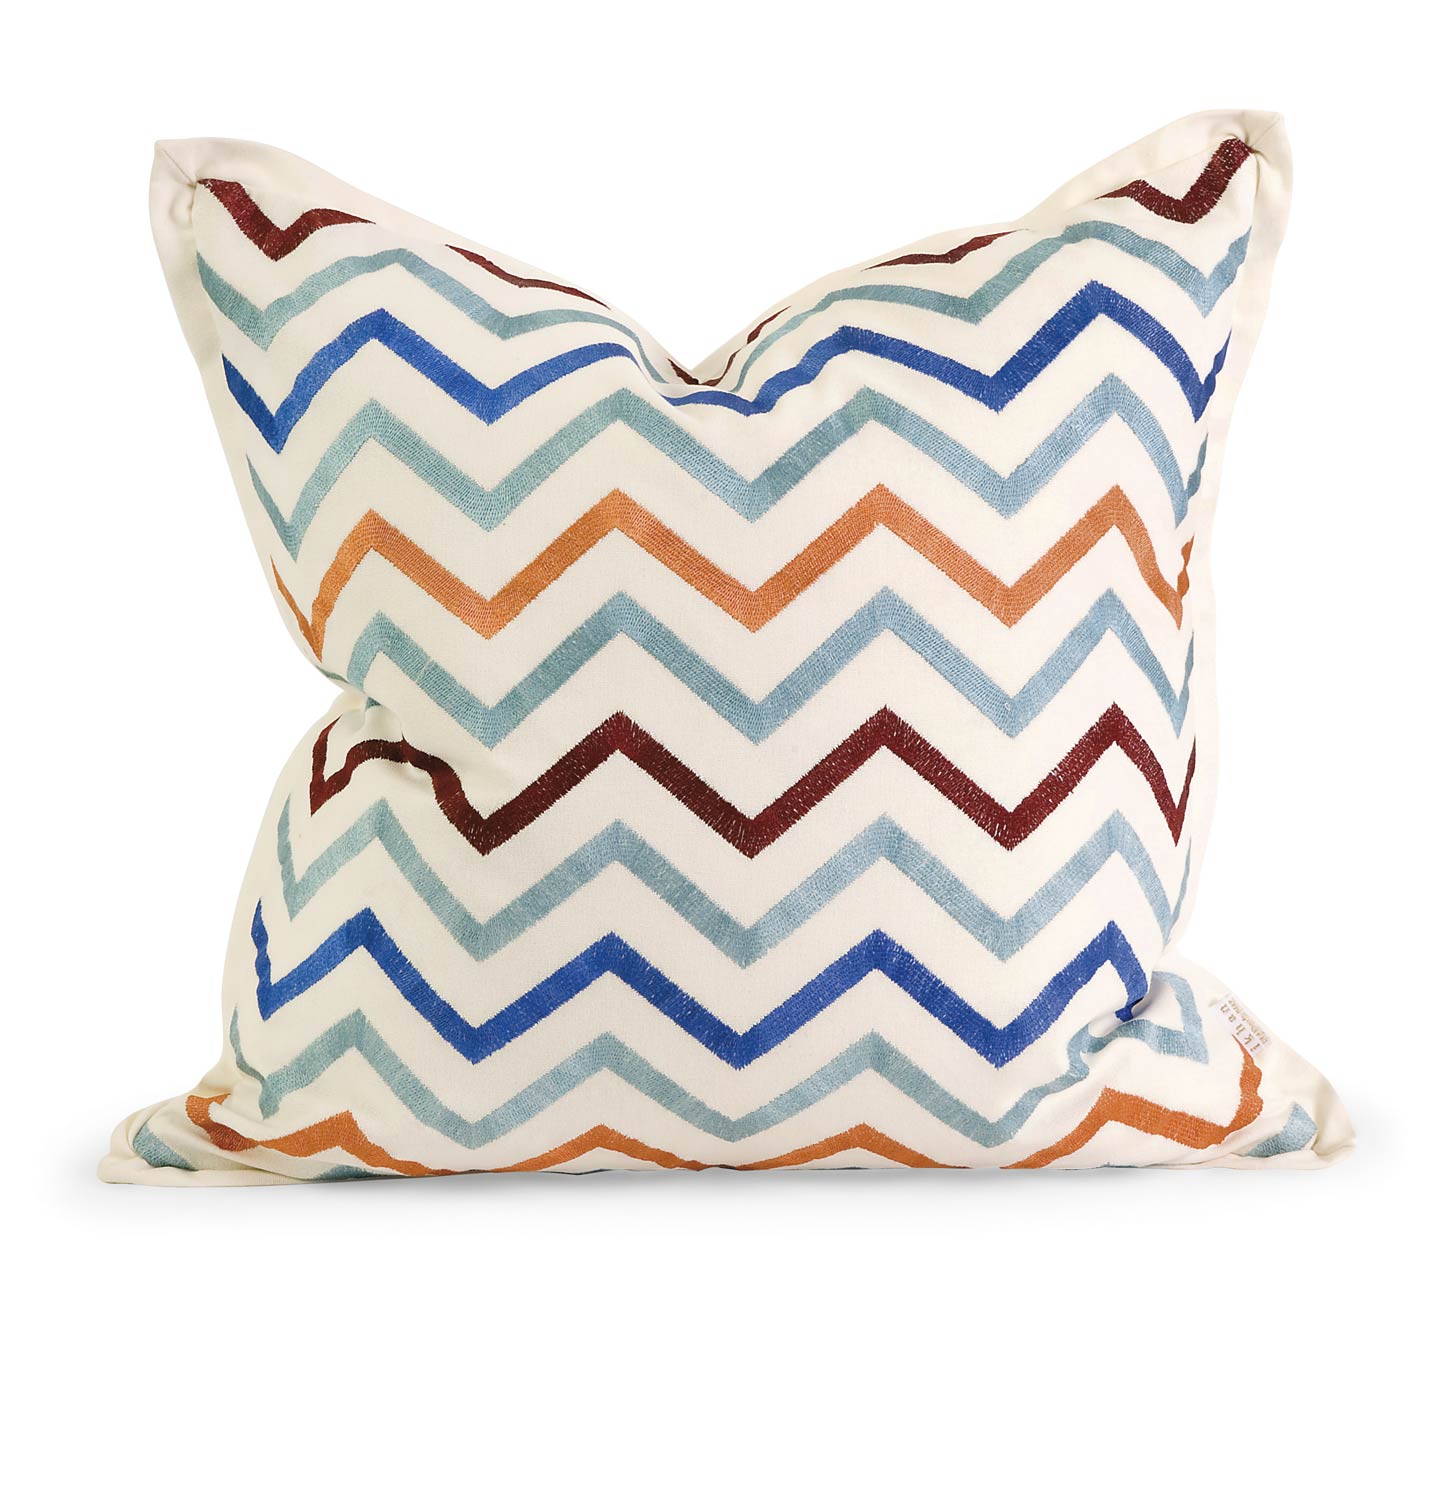 IMAX Ik Zola Embroidered Pillow with Down Fill